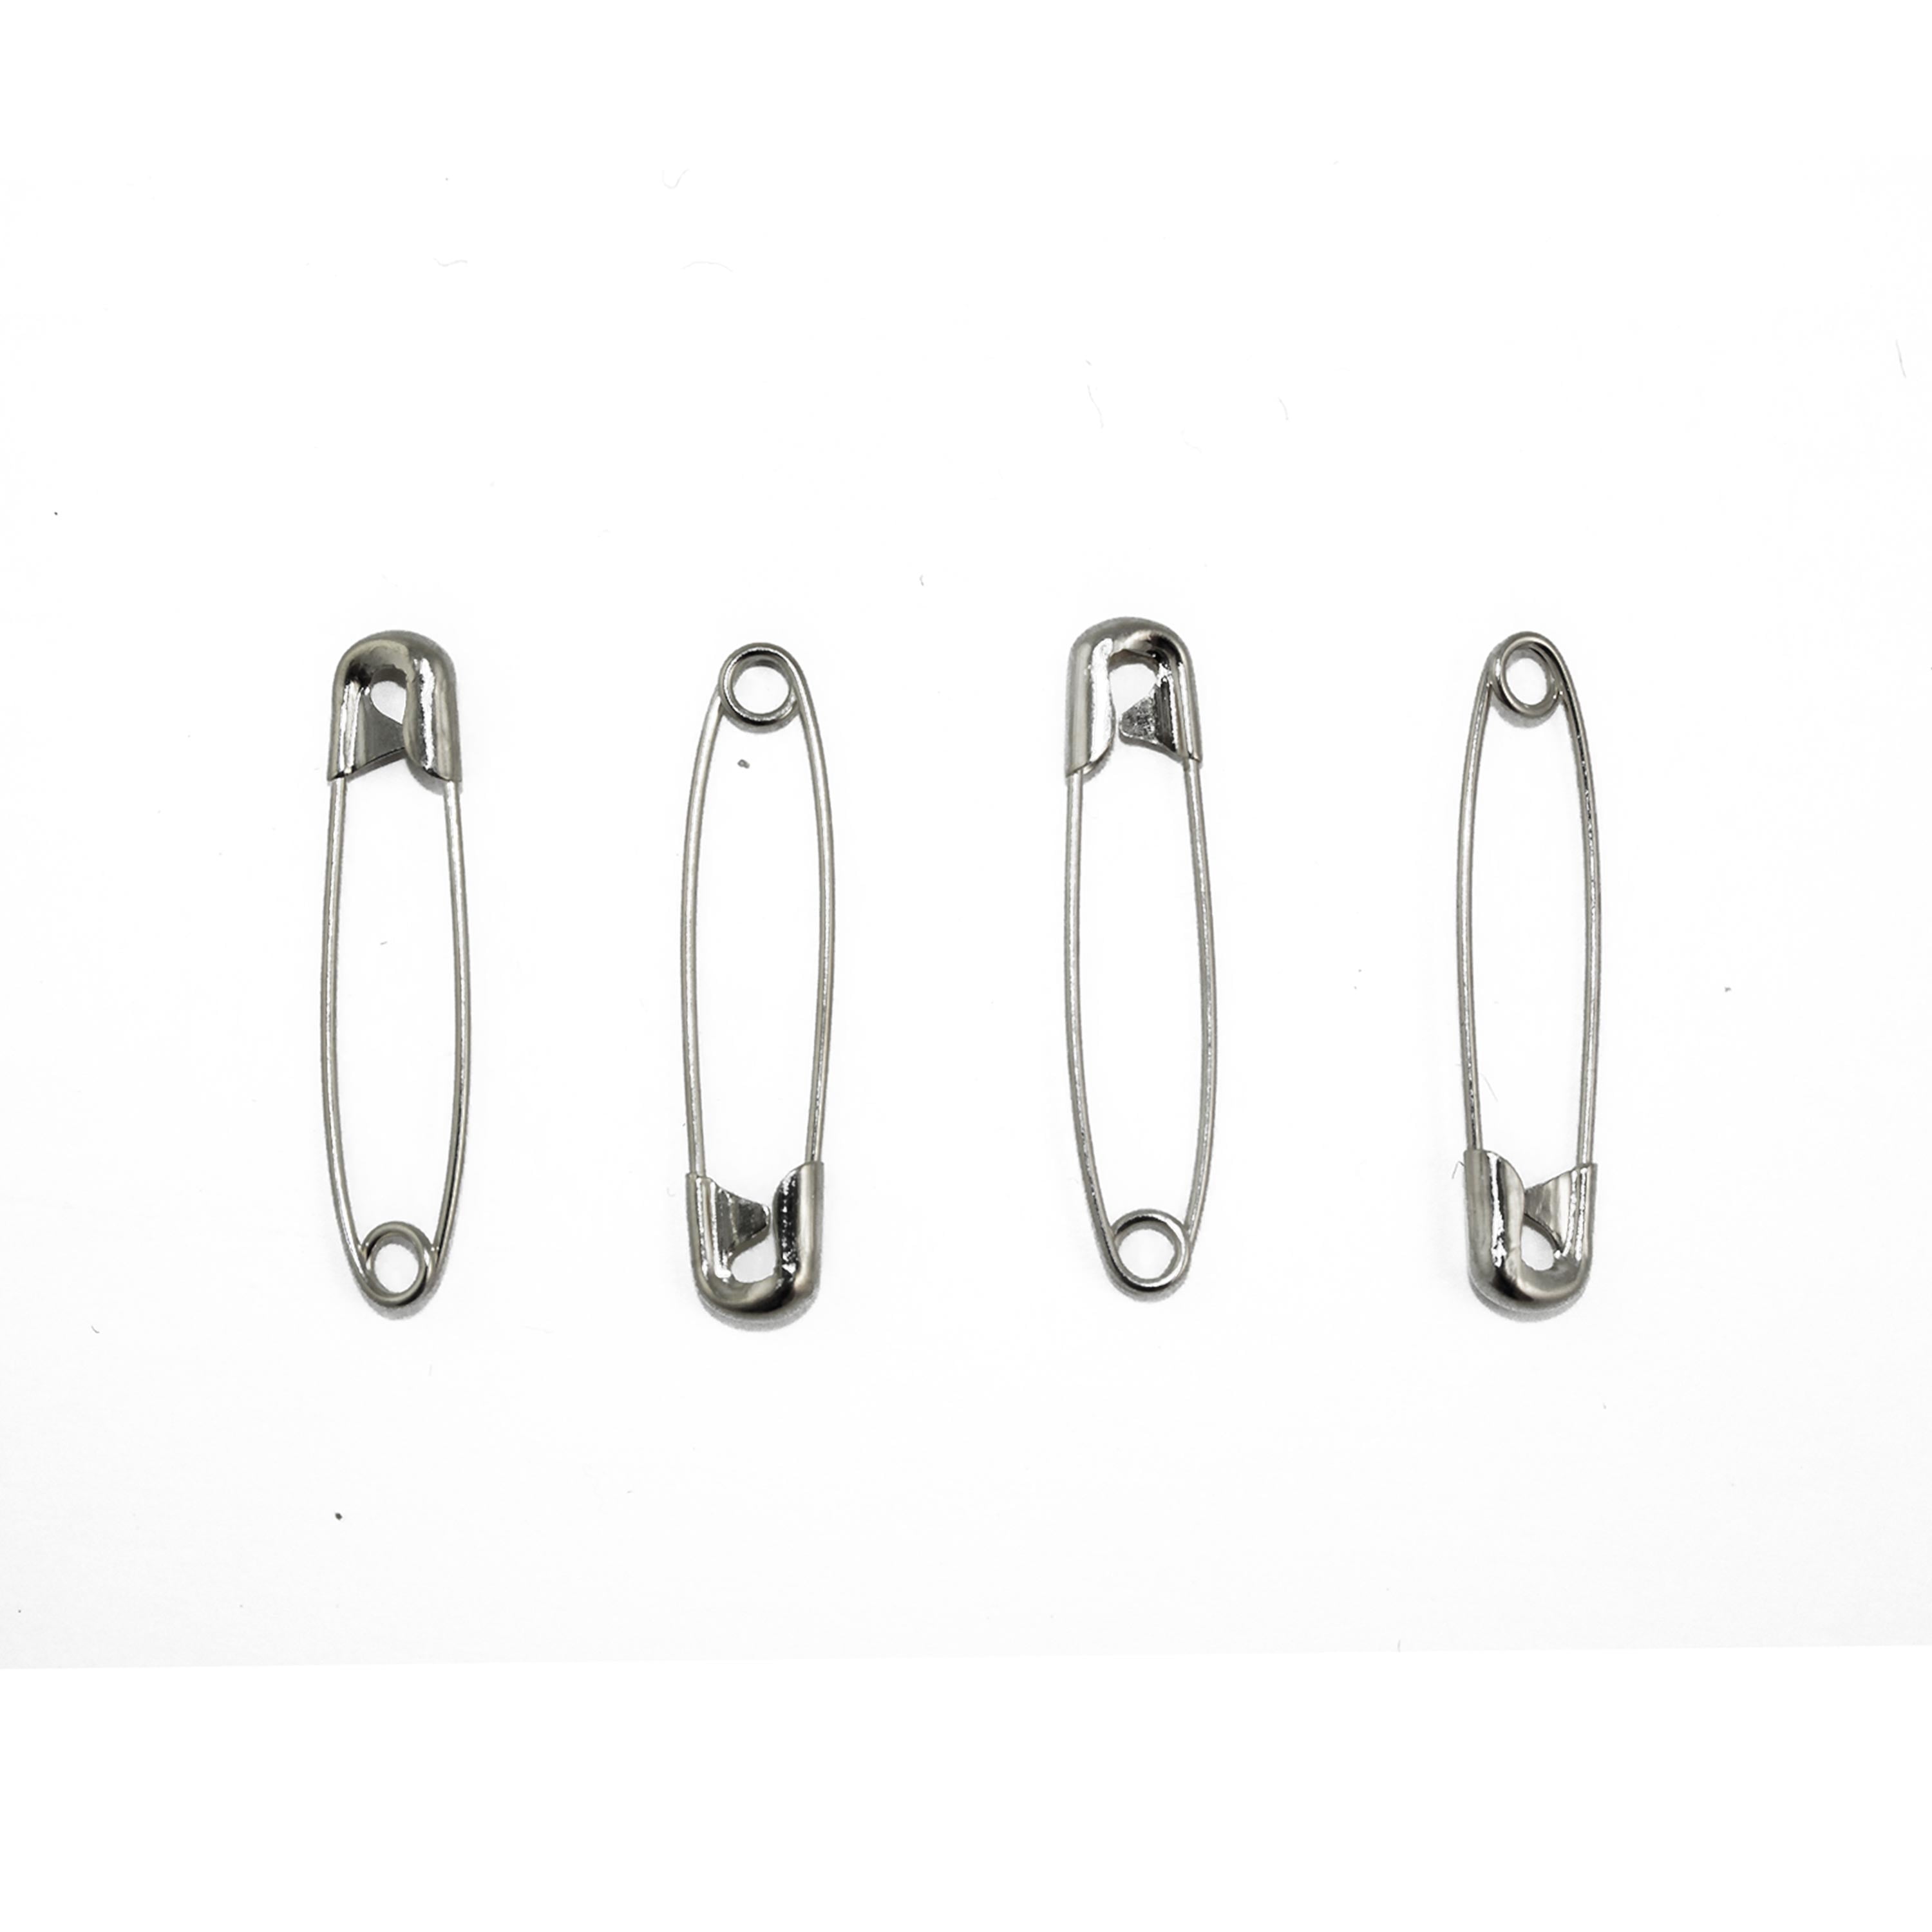 Brass Coiless Safety Pins - Small